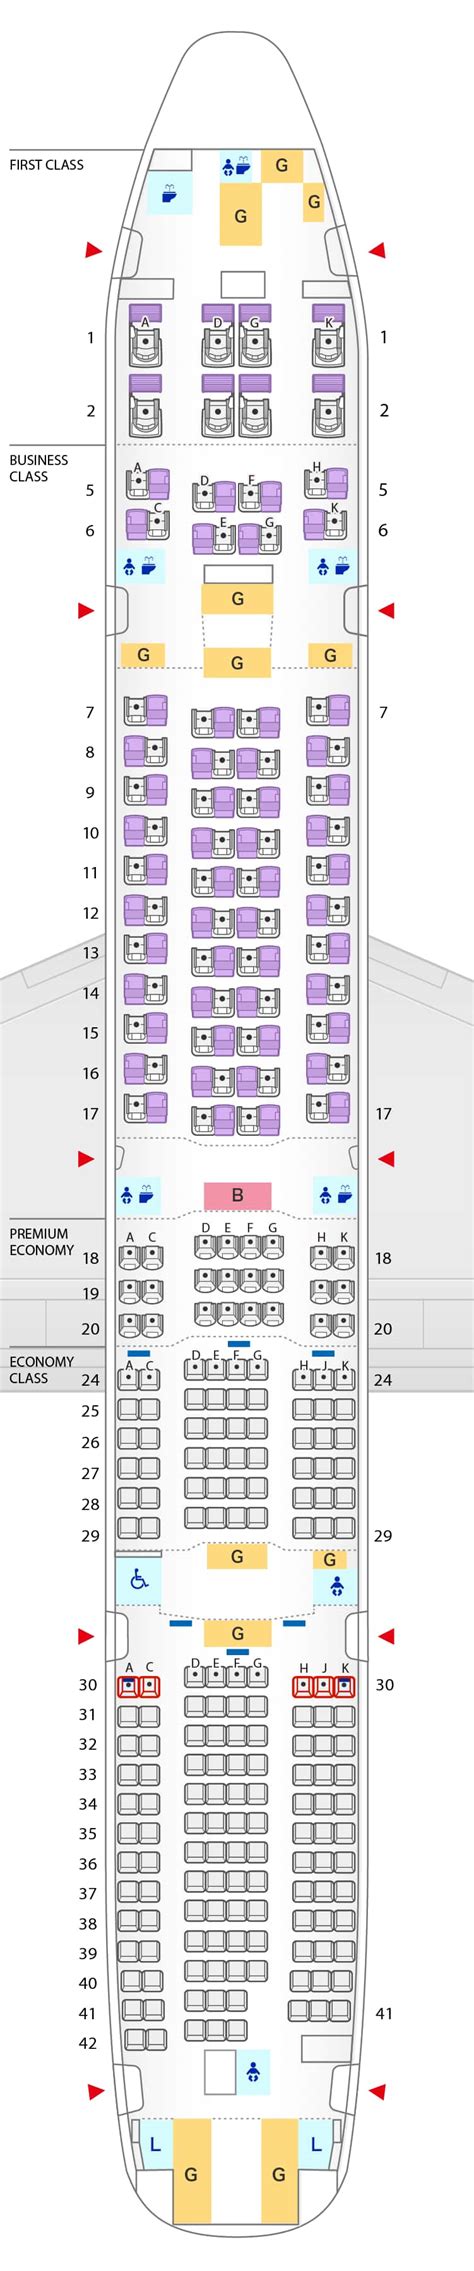  Don't fly it. The plane has 3-4-3 seating in a row. If you hav